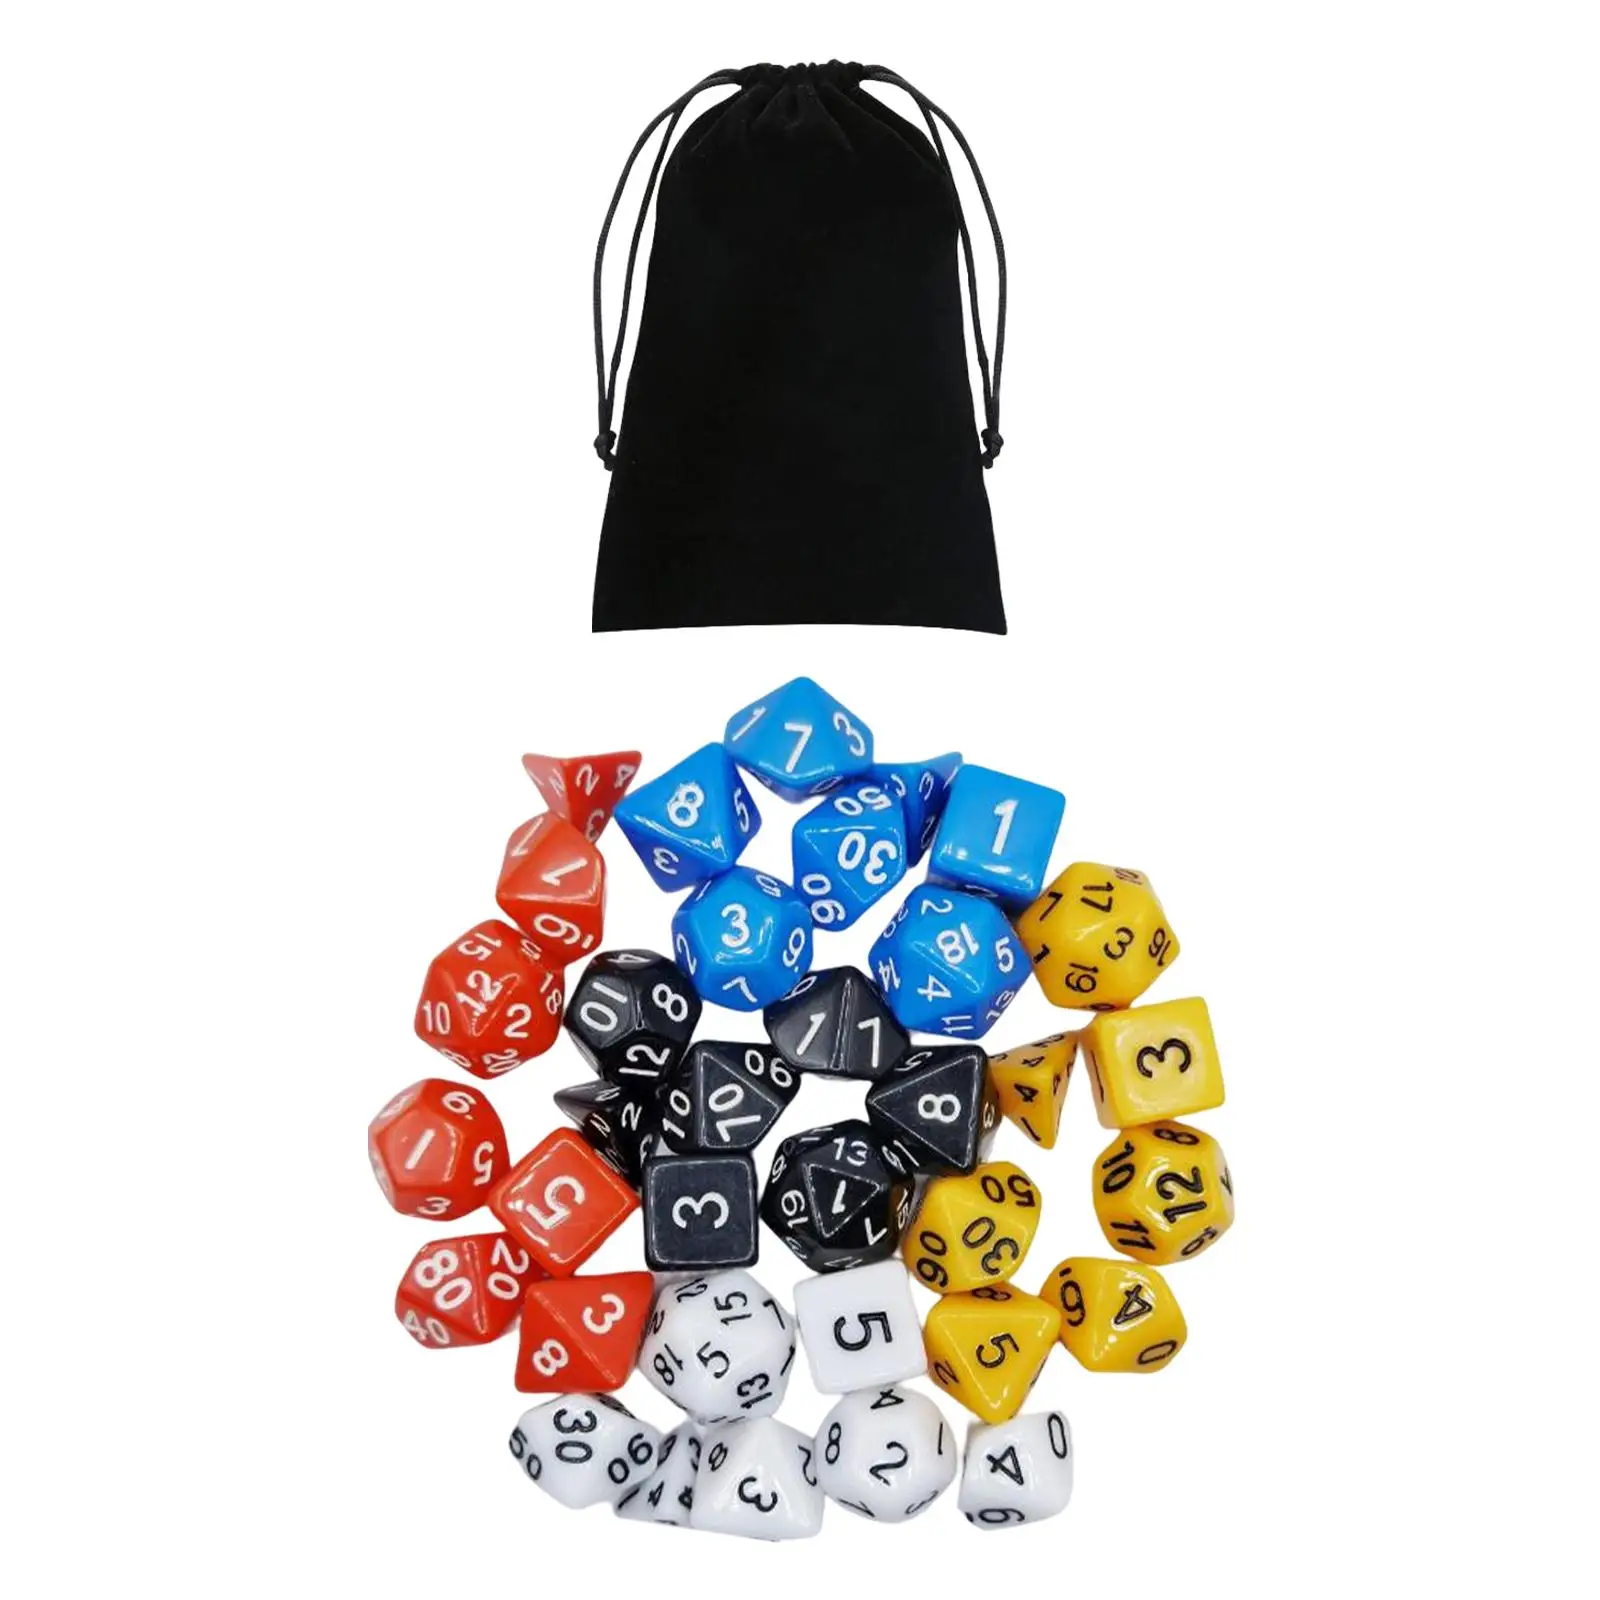 35 Pieces Polyhedral Dices Set Math Teaching Durable Rolling Dices for Board Game Props